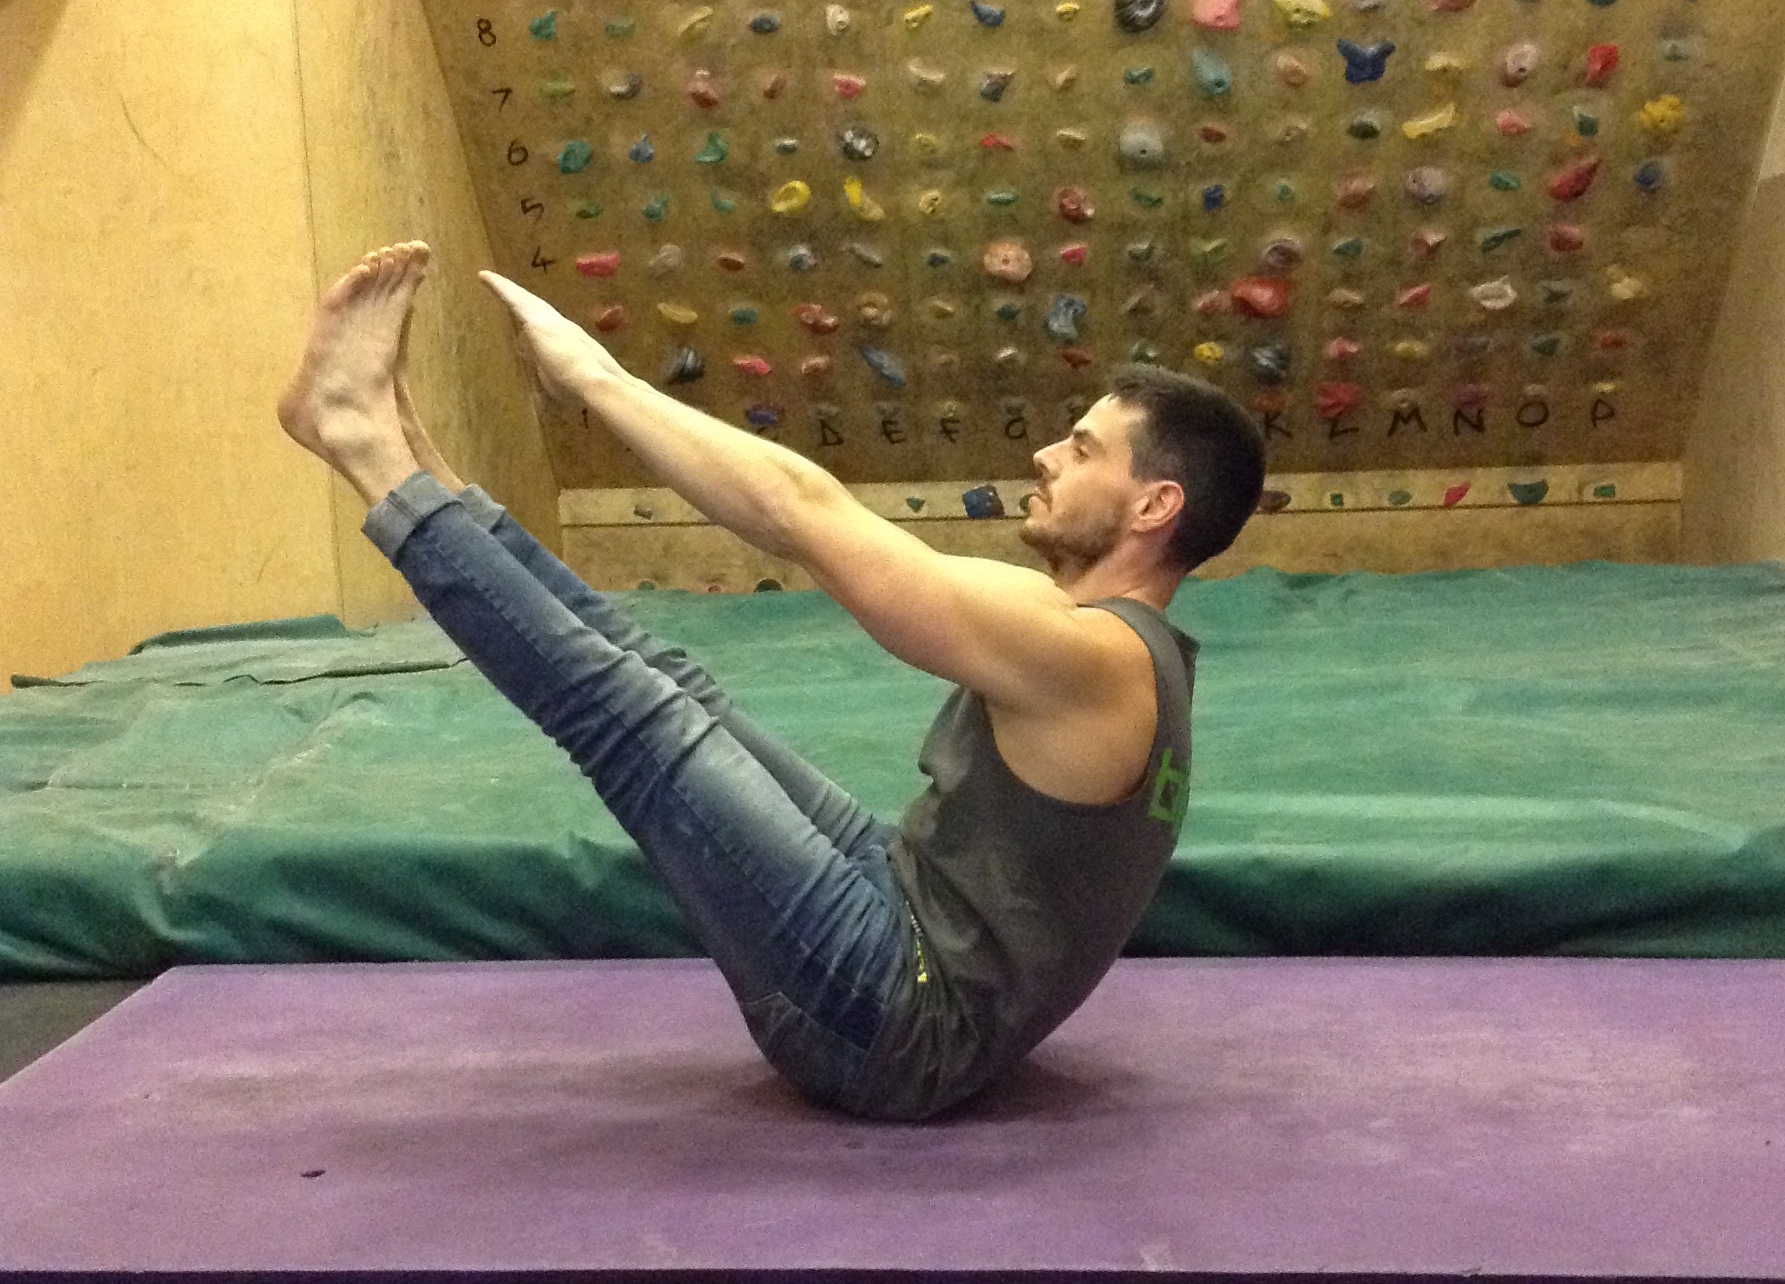 Climbing Training: Core Stability & Strength, Part 1